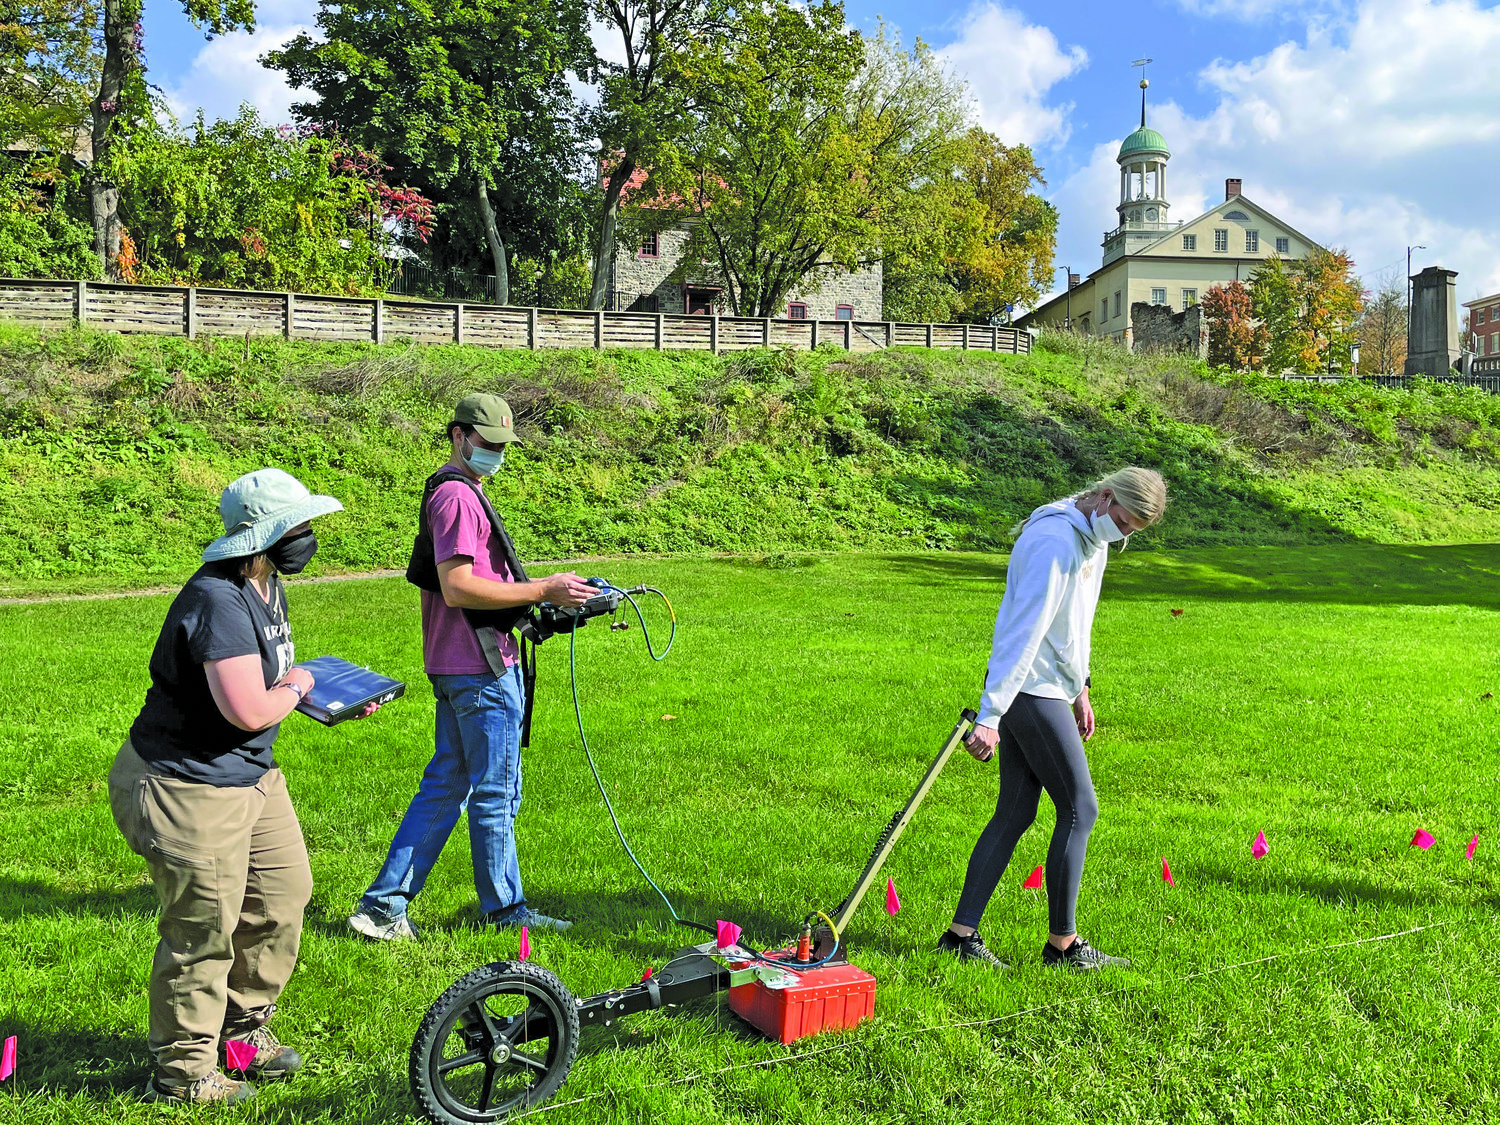 Dr. Hoskins and seismology students from Lehigh University used Ground Penetrating Radar to explore the Colonial Industrial Quarter in Bethlehem.